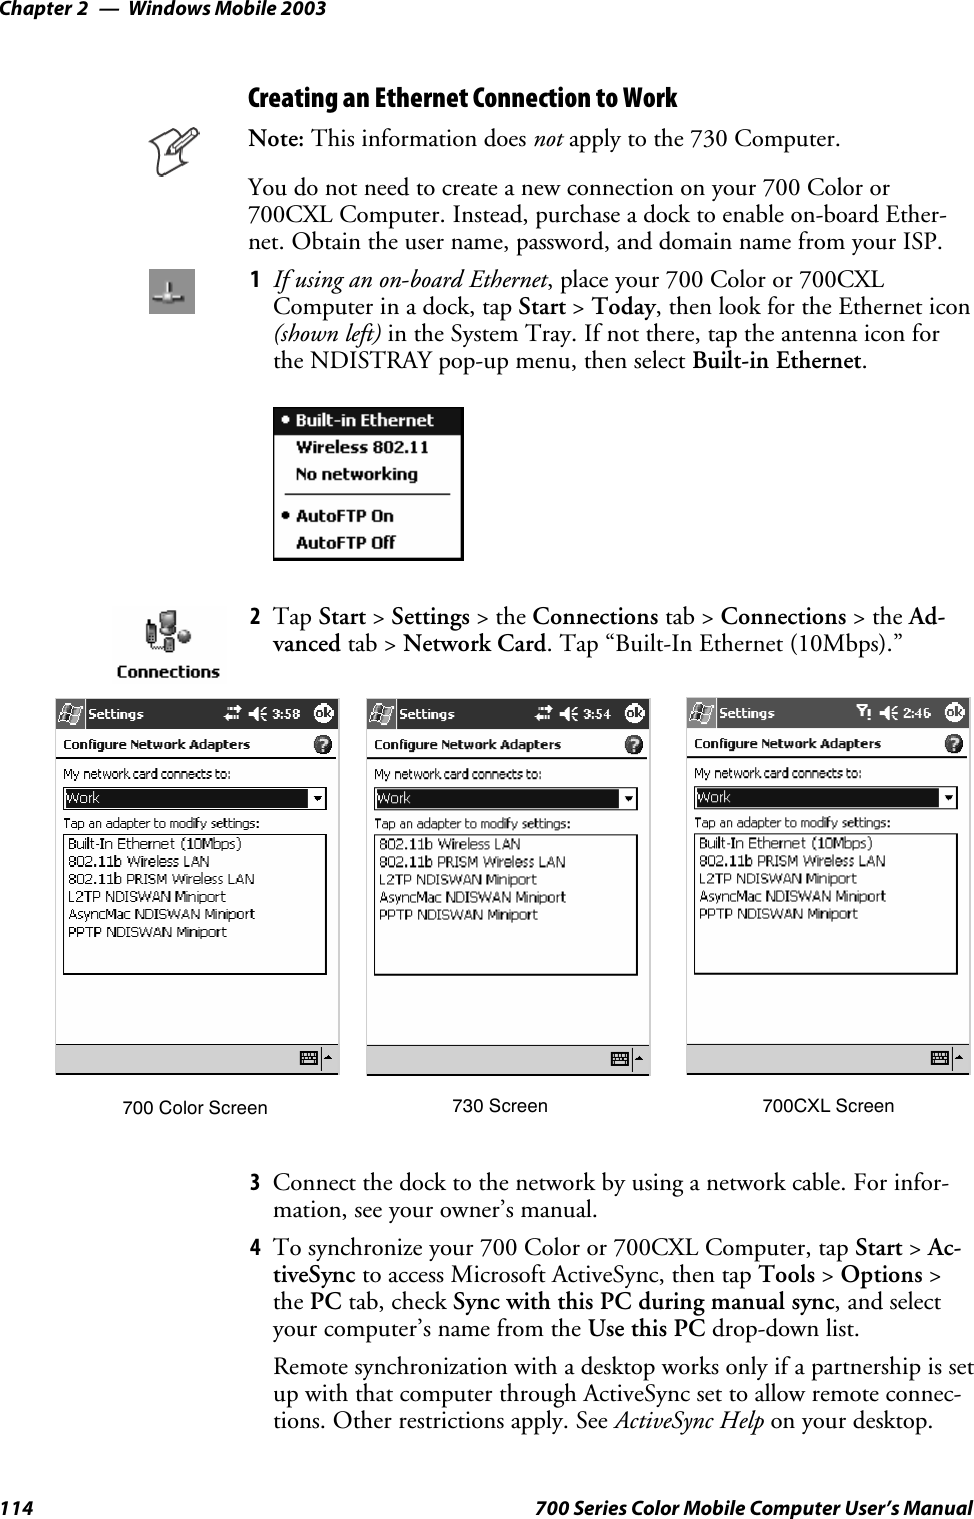 Windows Mobile 2003Chapter —2114 700 Series Color Mobile Computer User’s ManualCreating an Ethernet Connection to WorkNote: This information does not apply to the 730 Computer.You do not need to create a new connection on your 700 Color or700CXL Computer. Instead, purchase a dock to enable on-board Ether-net. Obtain the user name, password, and domain name from your ISP.1If using an on-board Ethernet, place your 700 Color or 700CXLComputer in a dock, tap Start &gt;Today, then look for the Ethernet icon(shown left) in the System Tray. If not there, tap the antenna icon forthe NDISTRAY pop-up menu, then select Built-in Ethernet.2Tap Start &gt;Settings &gt;theConnections tab &gt; Connections &gt;theAd-vanced tab &gt; Network Card. Tap “Built-In Ethernet (10Mbps).”700 Color Screen 730 Screen 700CXL Screen3Connect the dock to the network by using a network cable. For infor-mation, see your owner’s manual.4To synchronize your 700 Color or 700CXL Computer, tap Start &gt;Ac-tiveSync to access Microsoft ActiveSync, then tap Tools &gt;Options &gt;the PC tab, check Sync with this PC during manual sync,andselectyour computer’s name from the Use this PC drop-down list.Remote synchronization with a desktop works only if a partnership is setup with that computer through ActiveSync set to allow remote connec-tions. Other restrictions apply. See ActiveSync Help on your desktop.